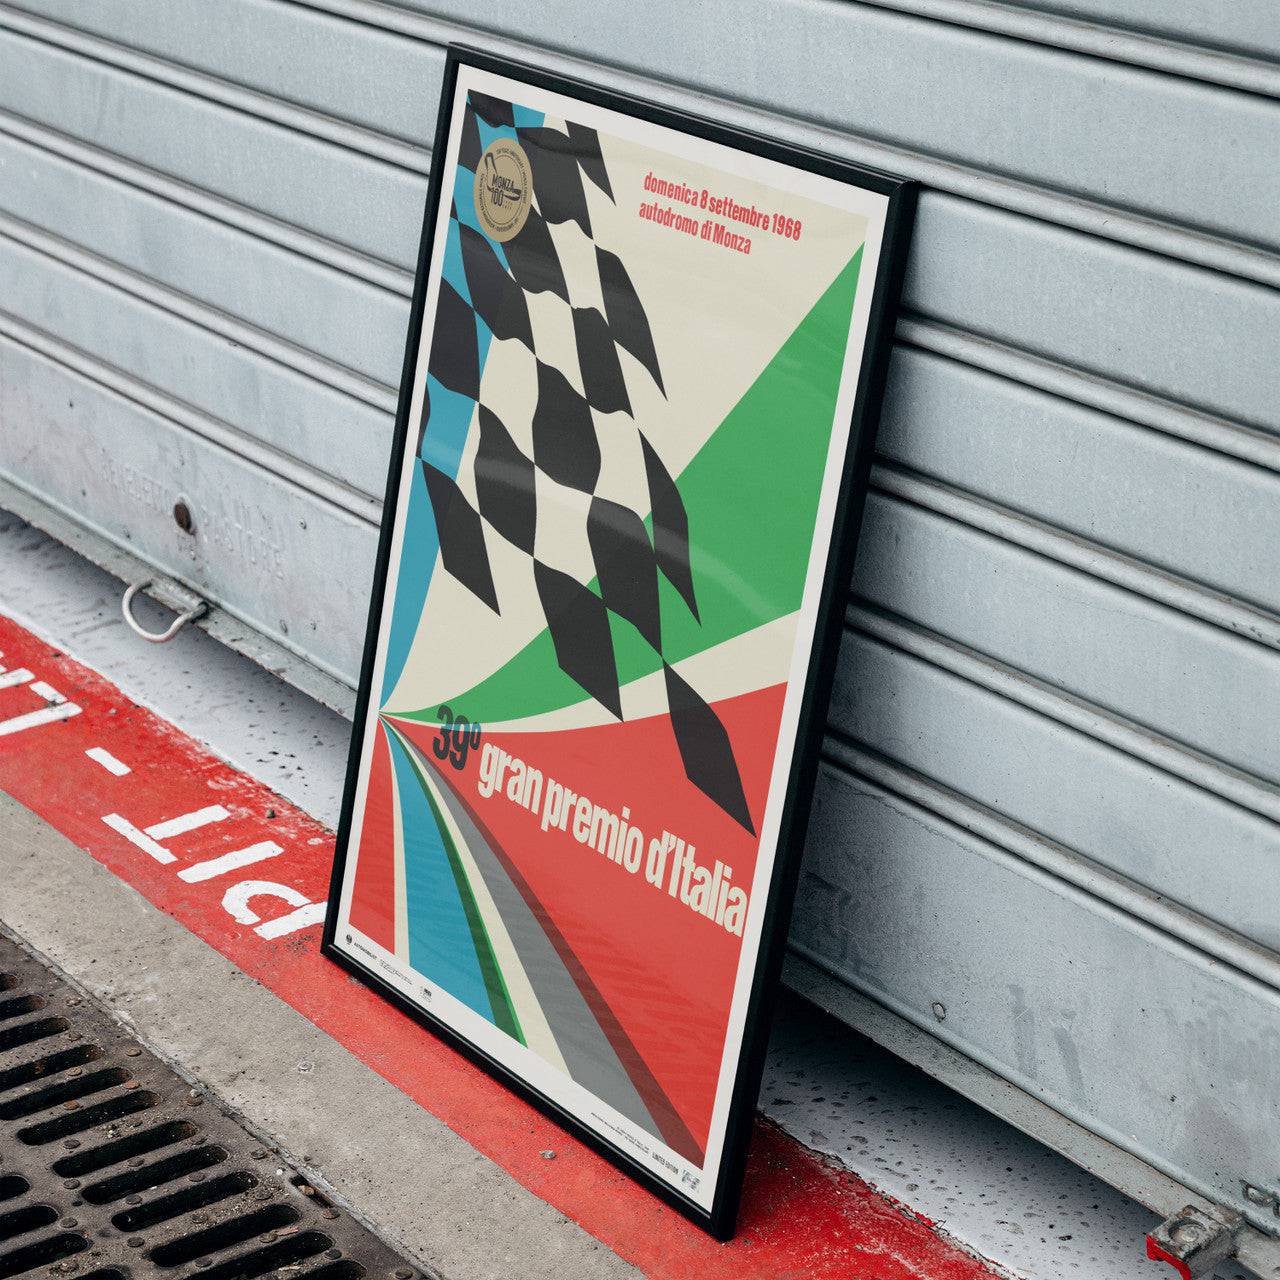 Monza Circuit - 100 Years Anniversary - 1968 | Limited Edition